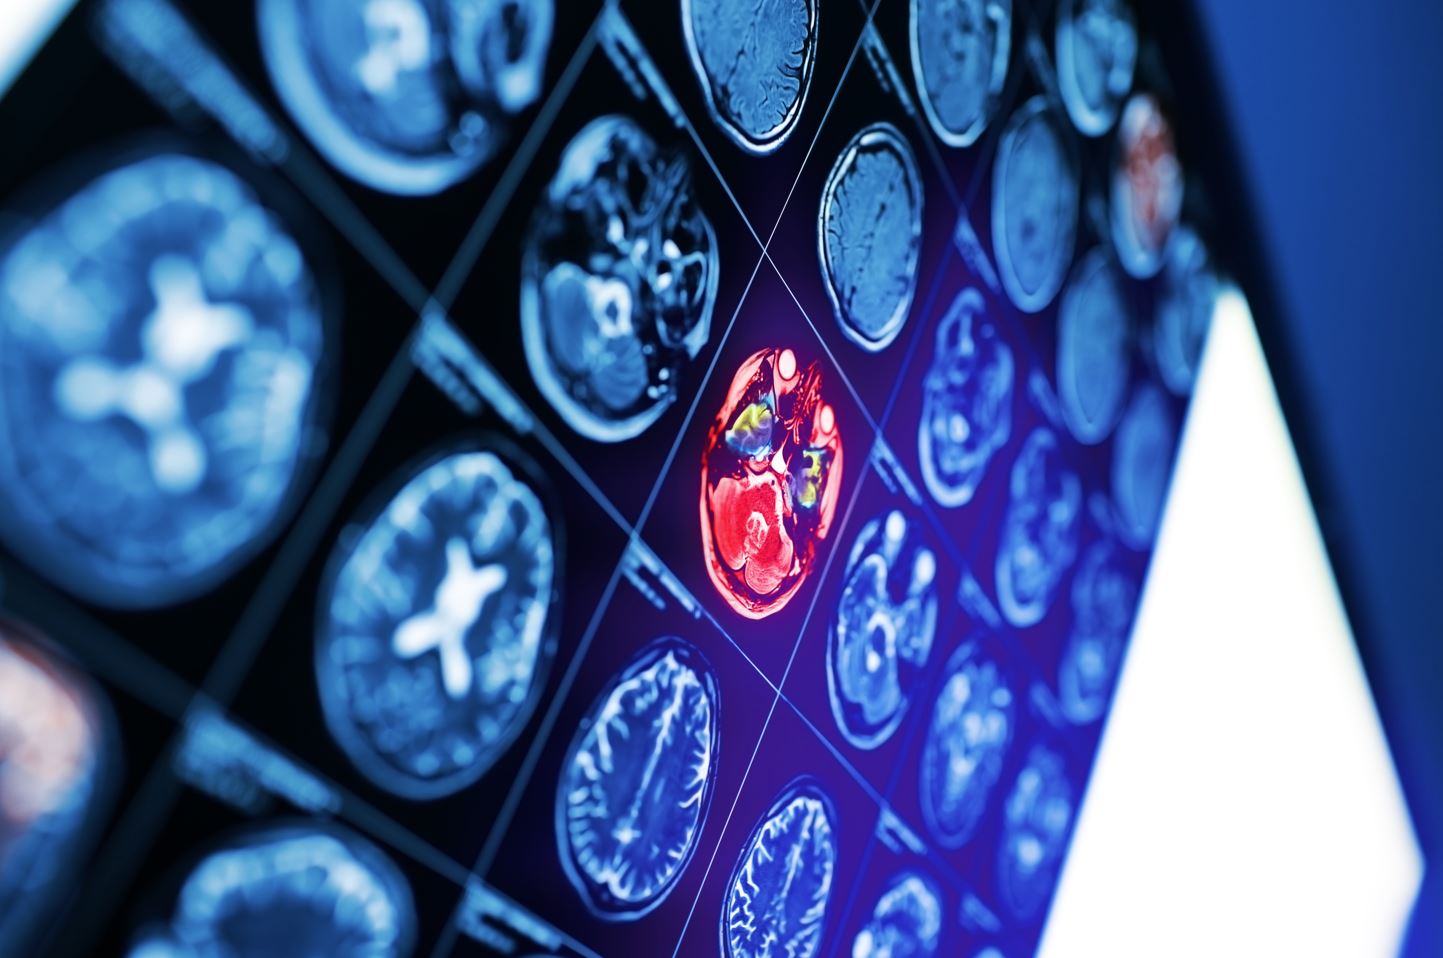 Brain injuries can be catastrophic, causing immediate cognitive disabilities. In other situations, the repercussions of brain trauma may not appear immediately in the victim.